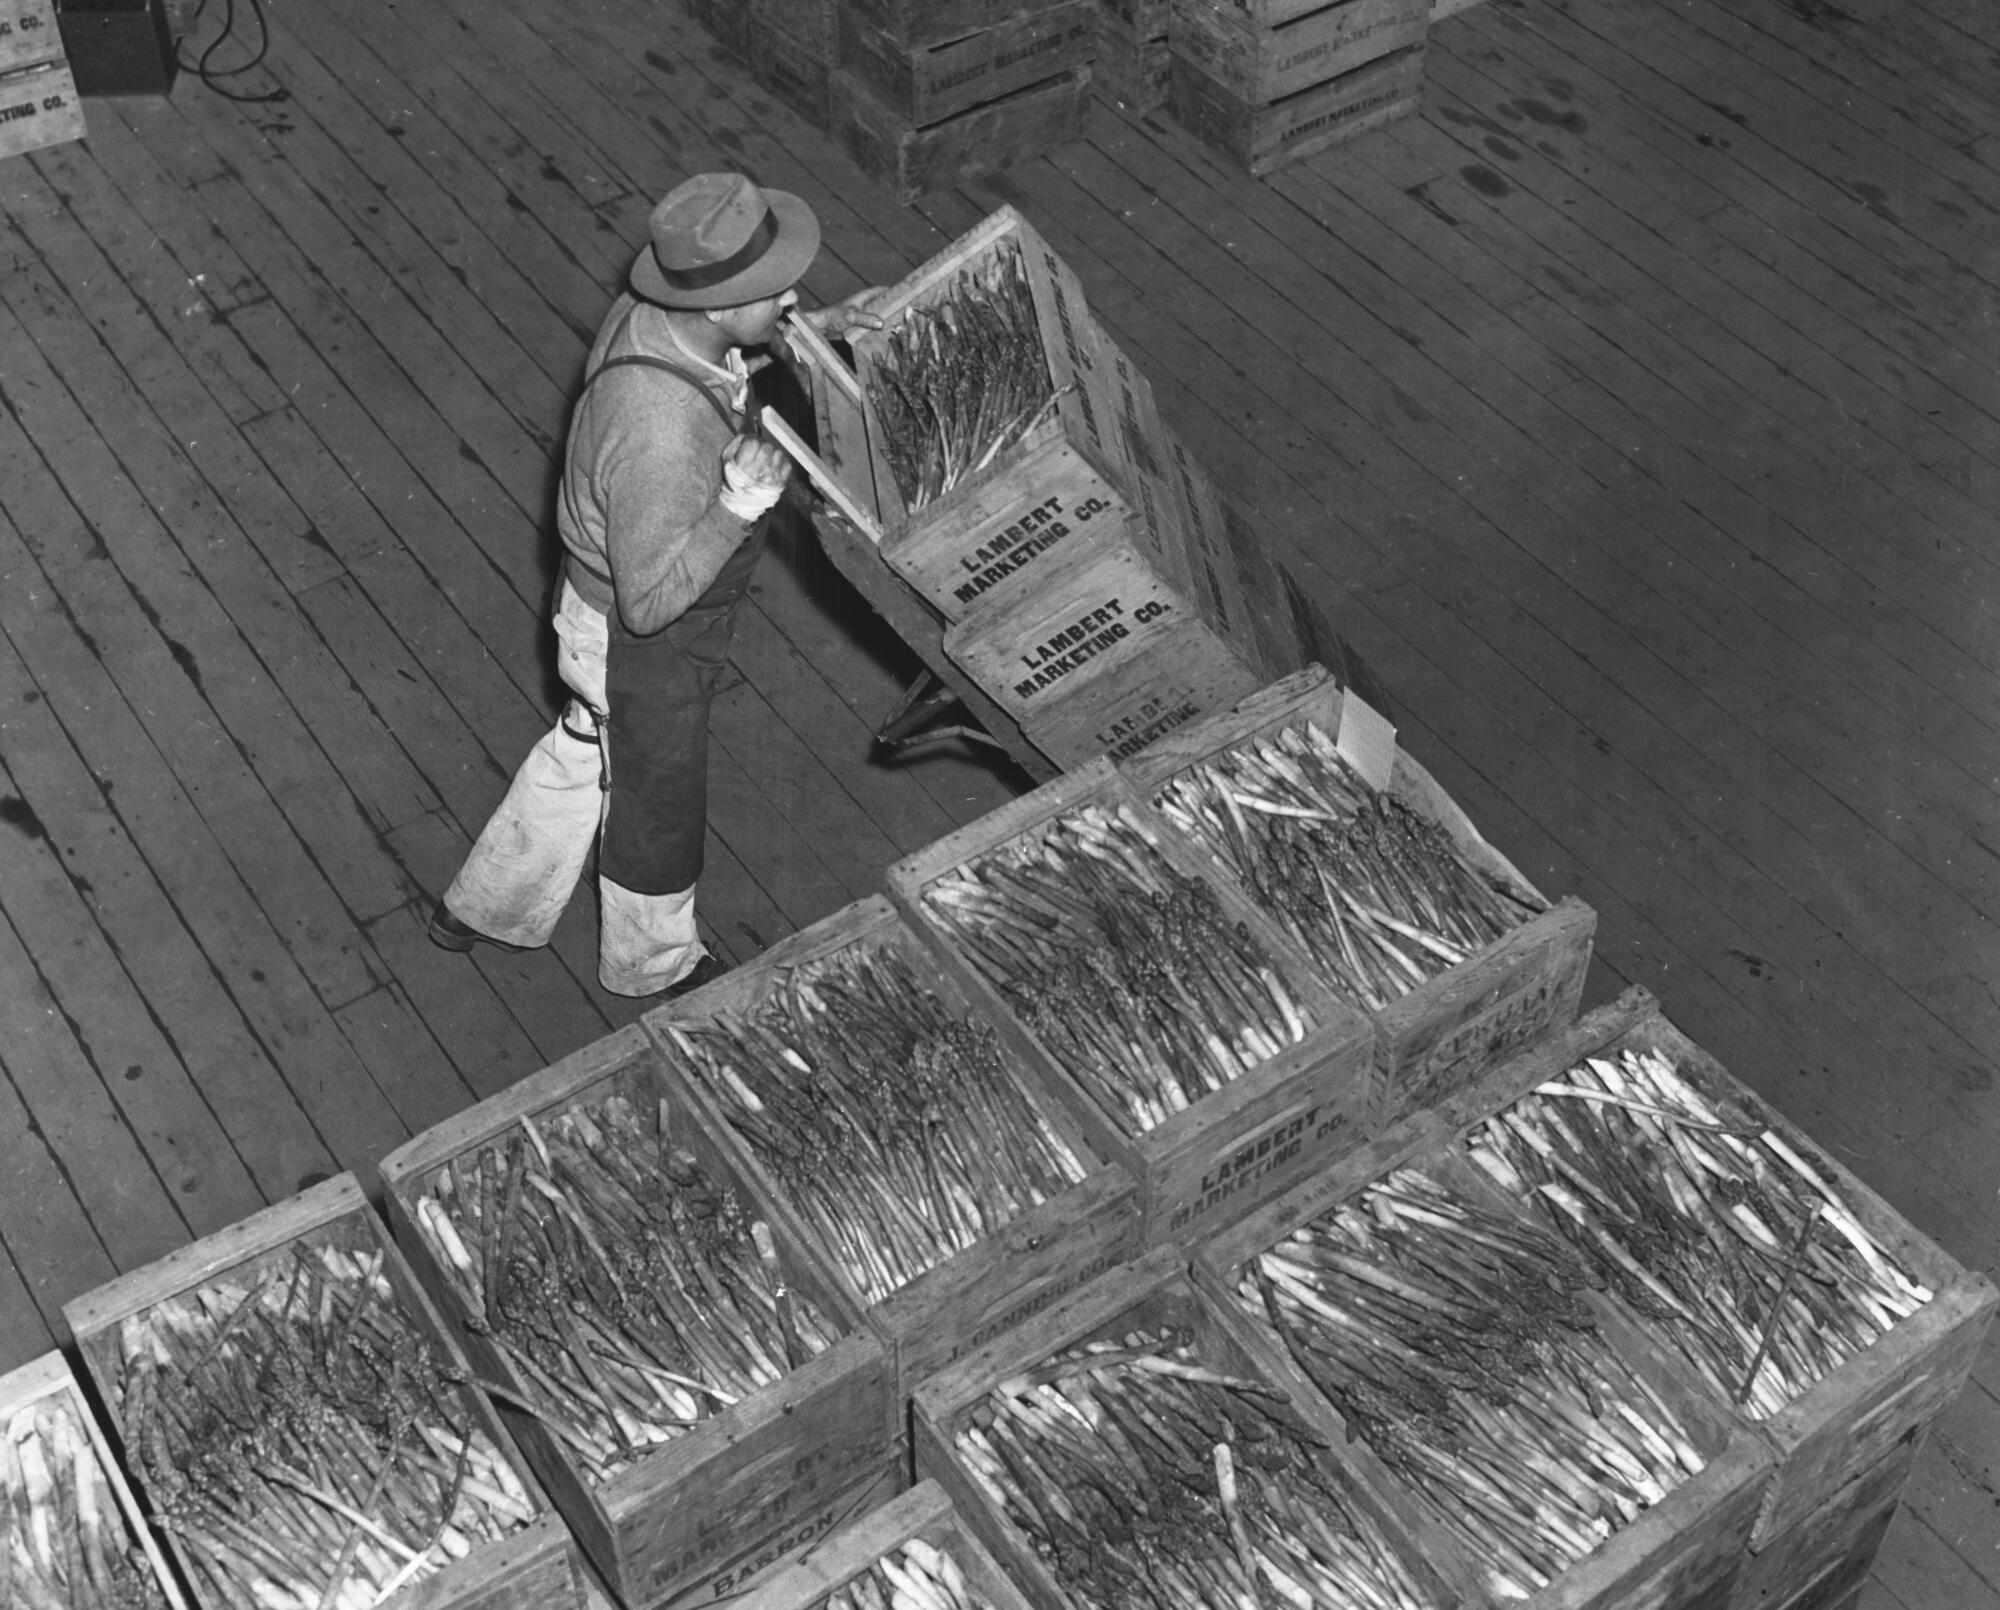 A high-angle view of a porter pushing a sack truck loaded with crates full of asparagus spears.